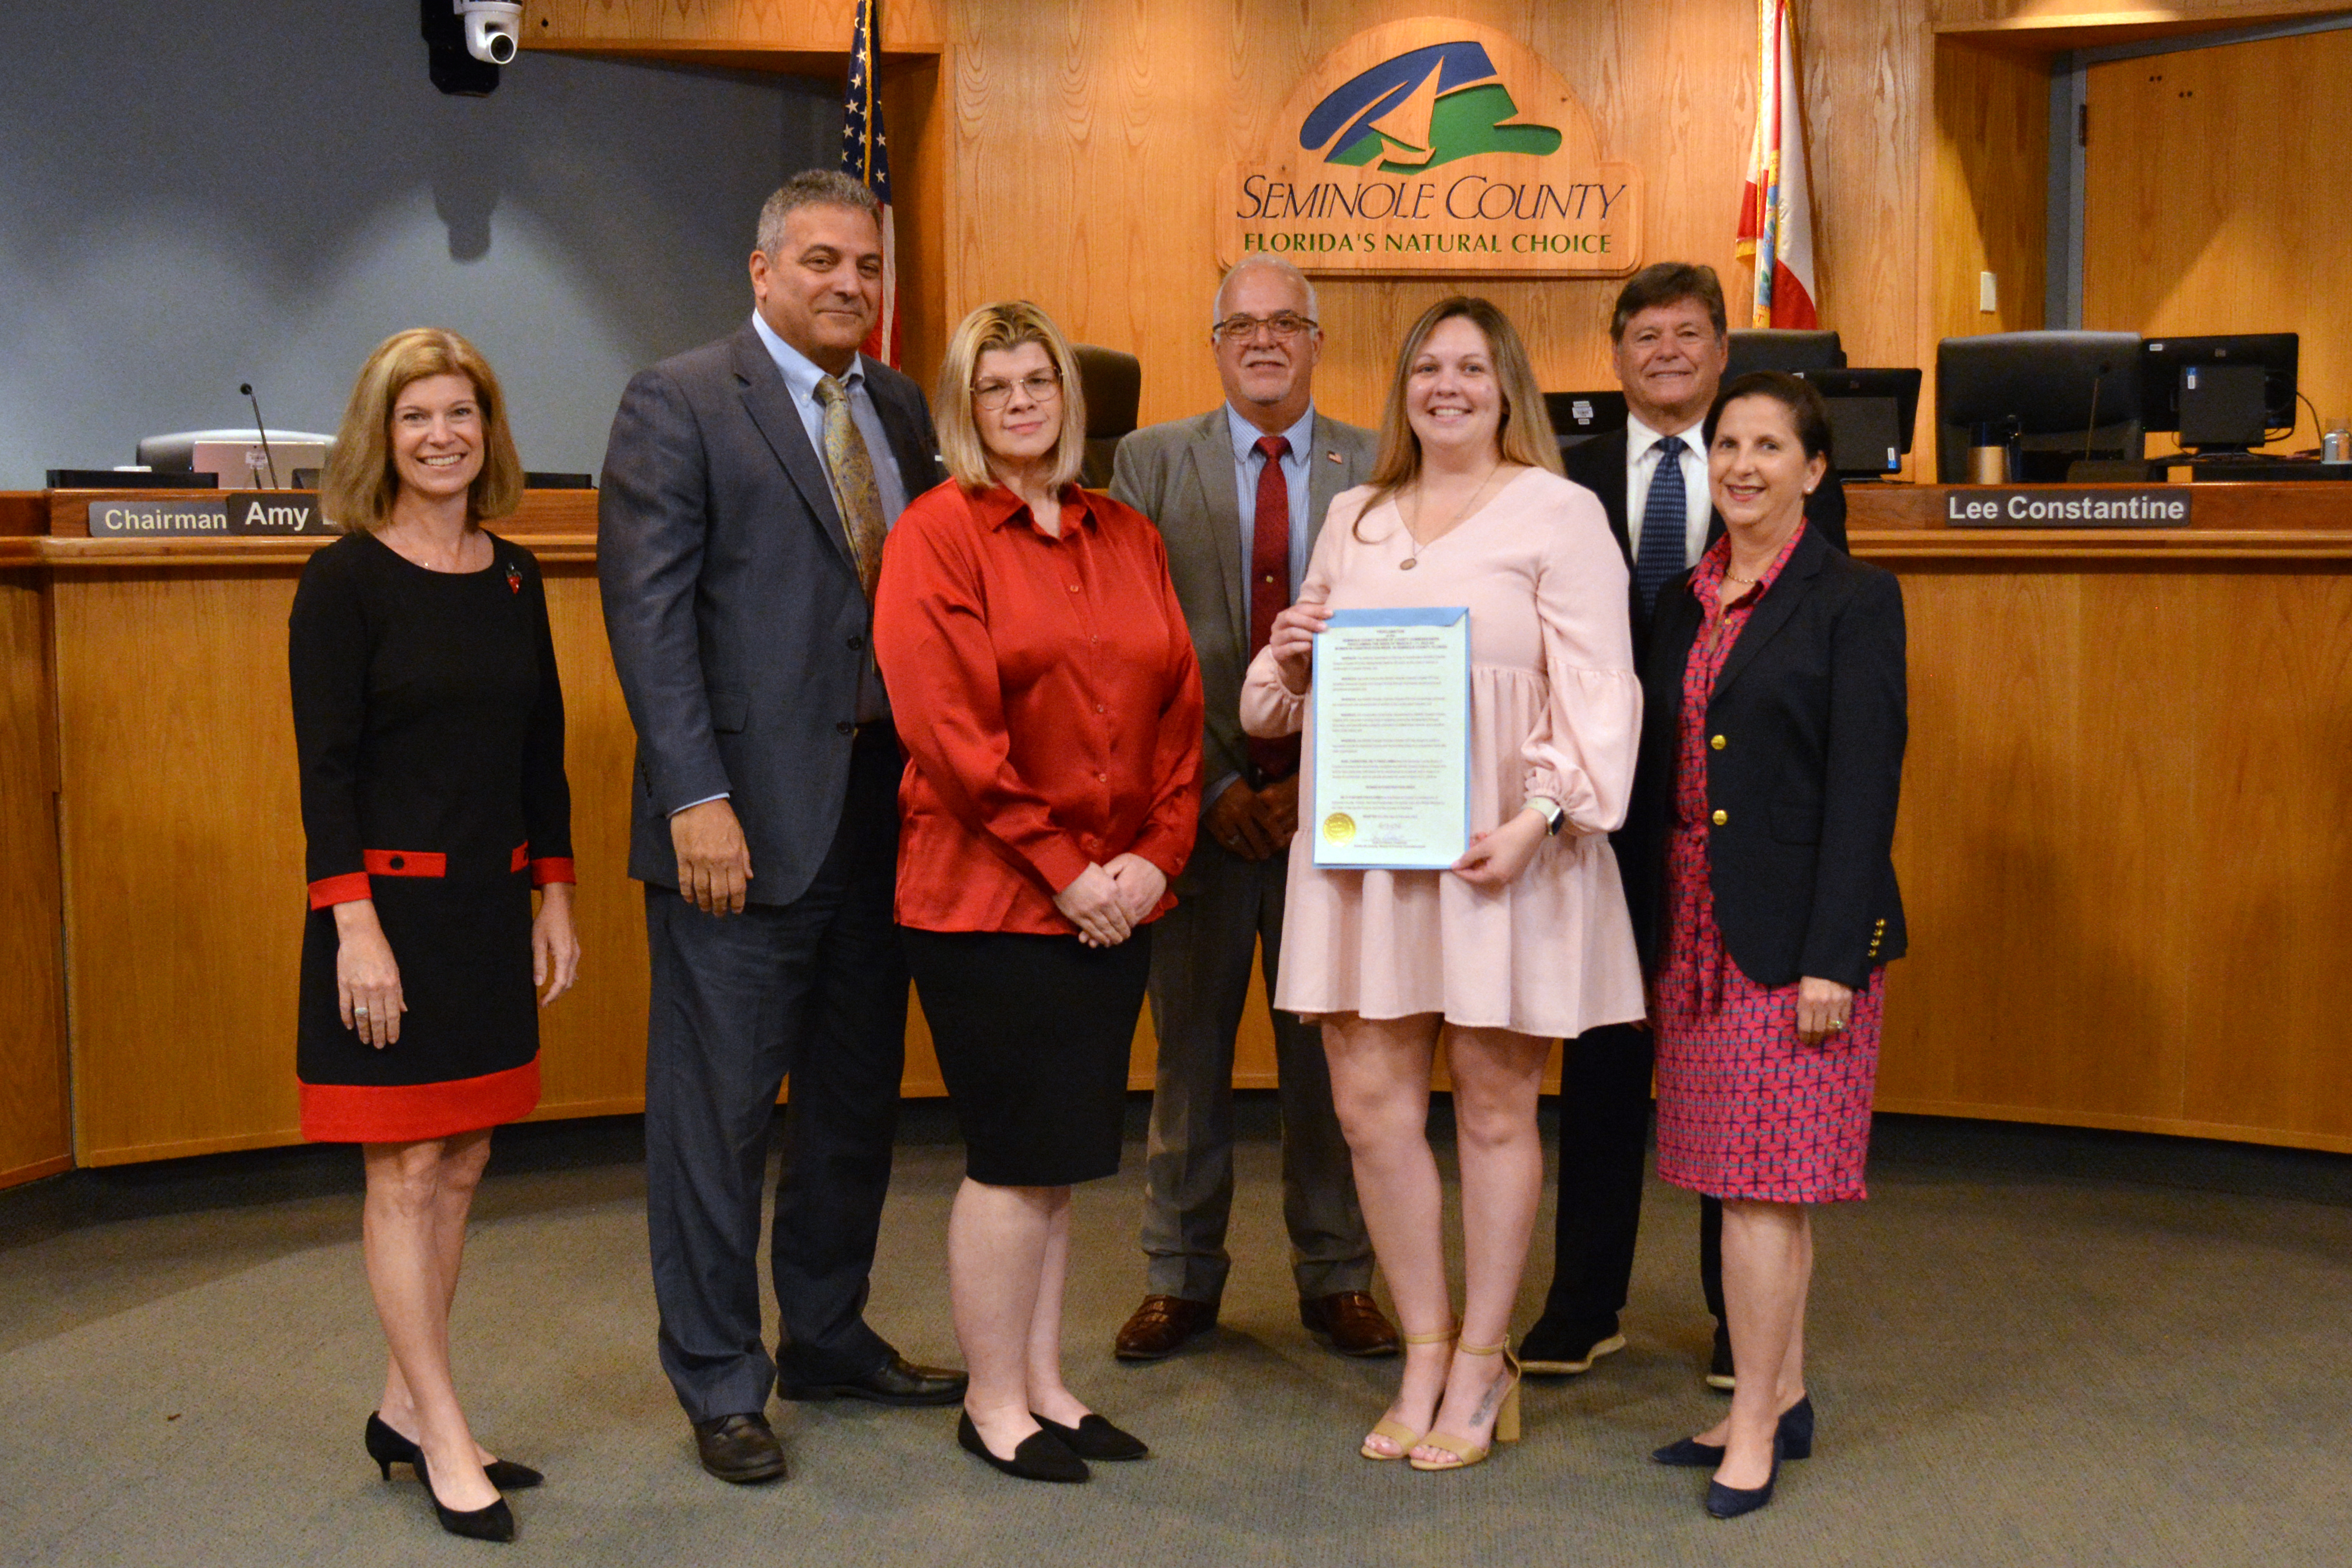 Proclamation - Proclaiming the Week of March 5 - 11, 2023 as Women in Construction Week, in Seminole County, Florida (Jennifer Kline and Kristin Andreasen - National Association of Women in Construction)